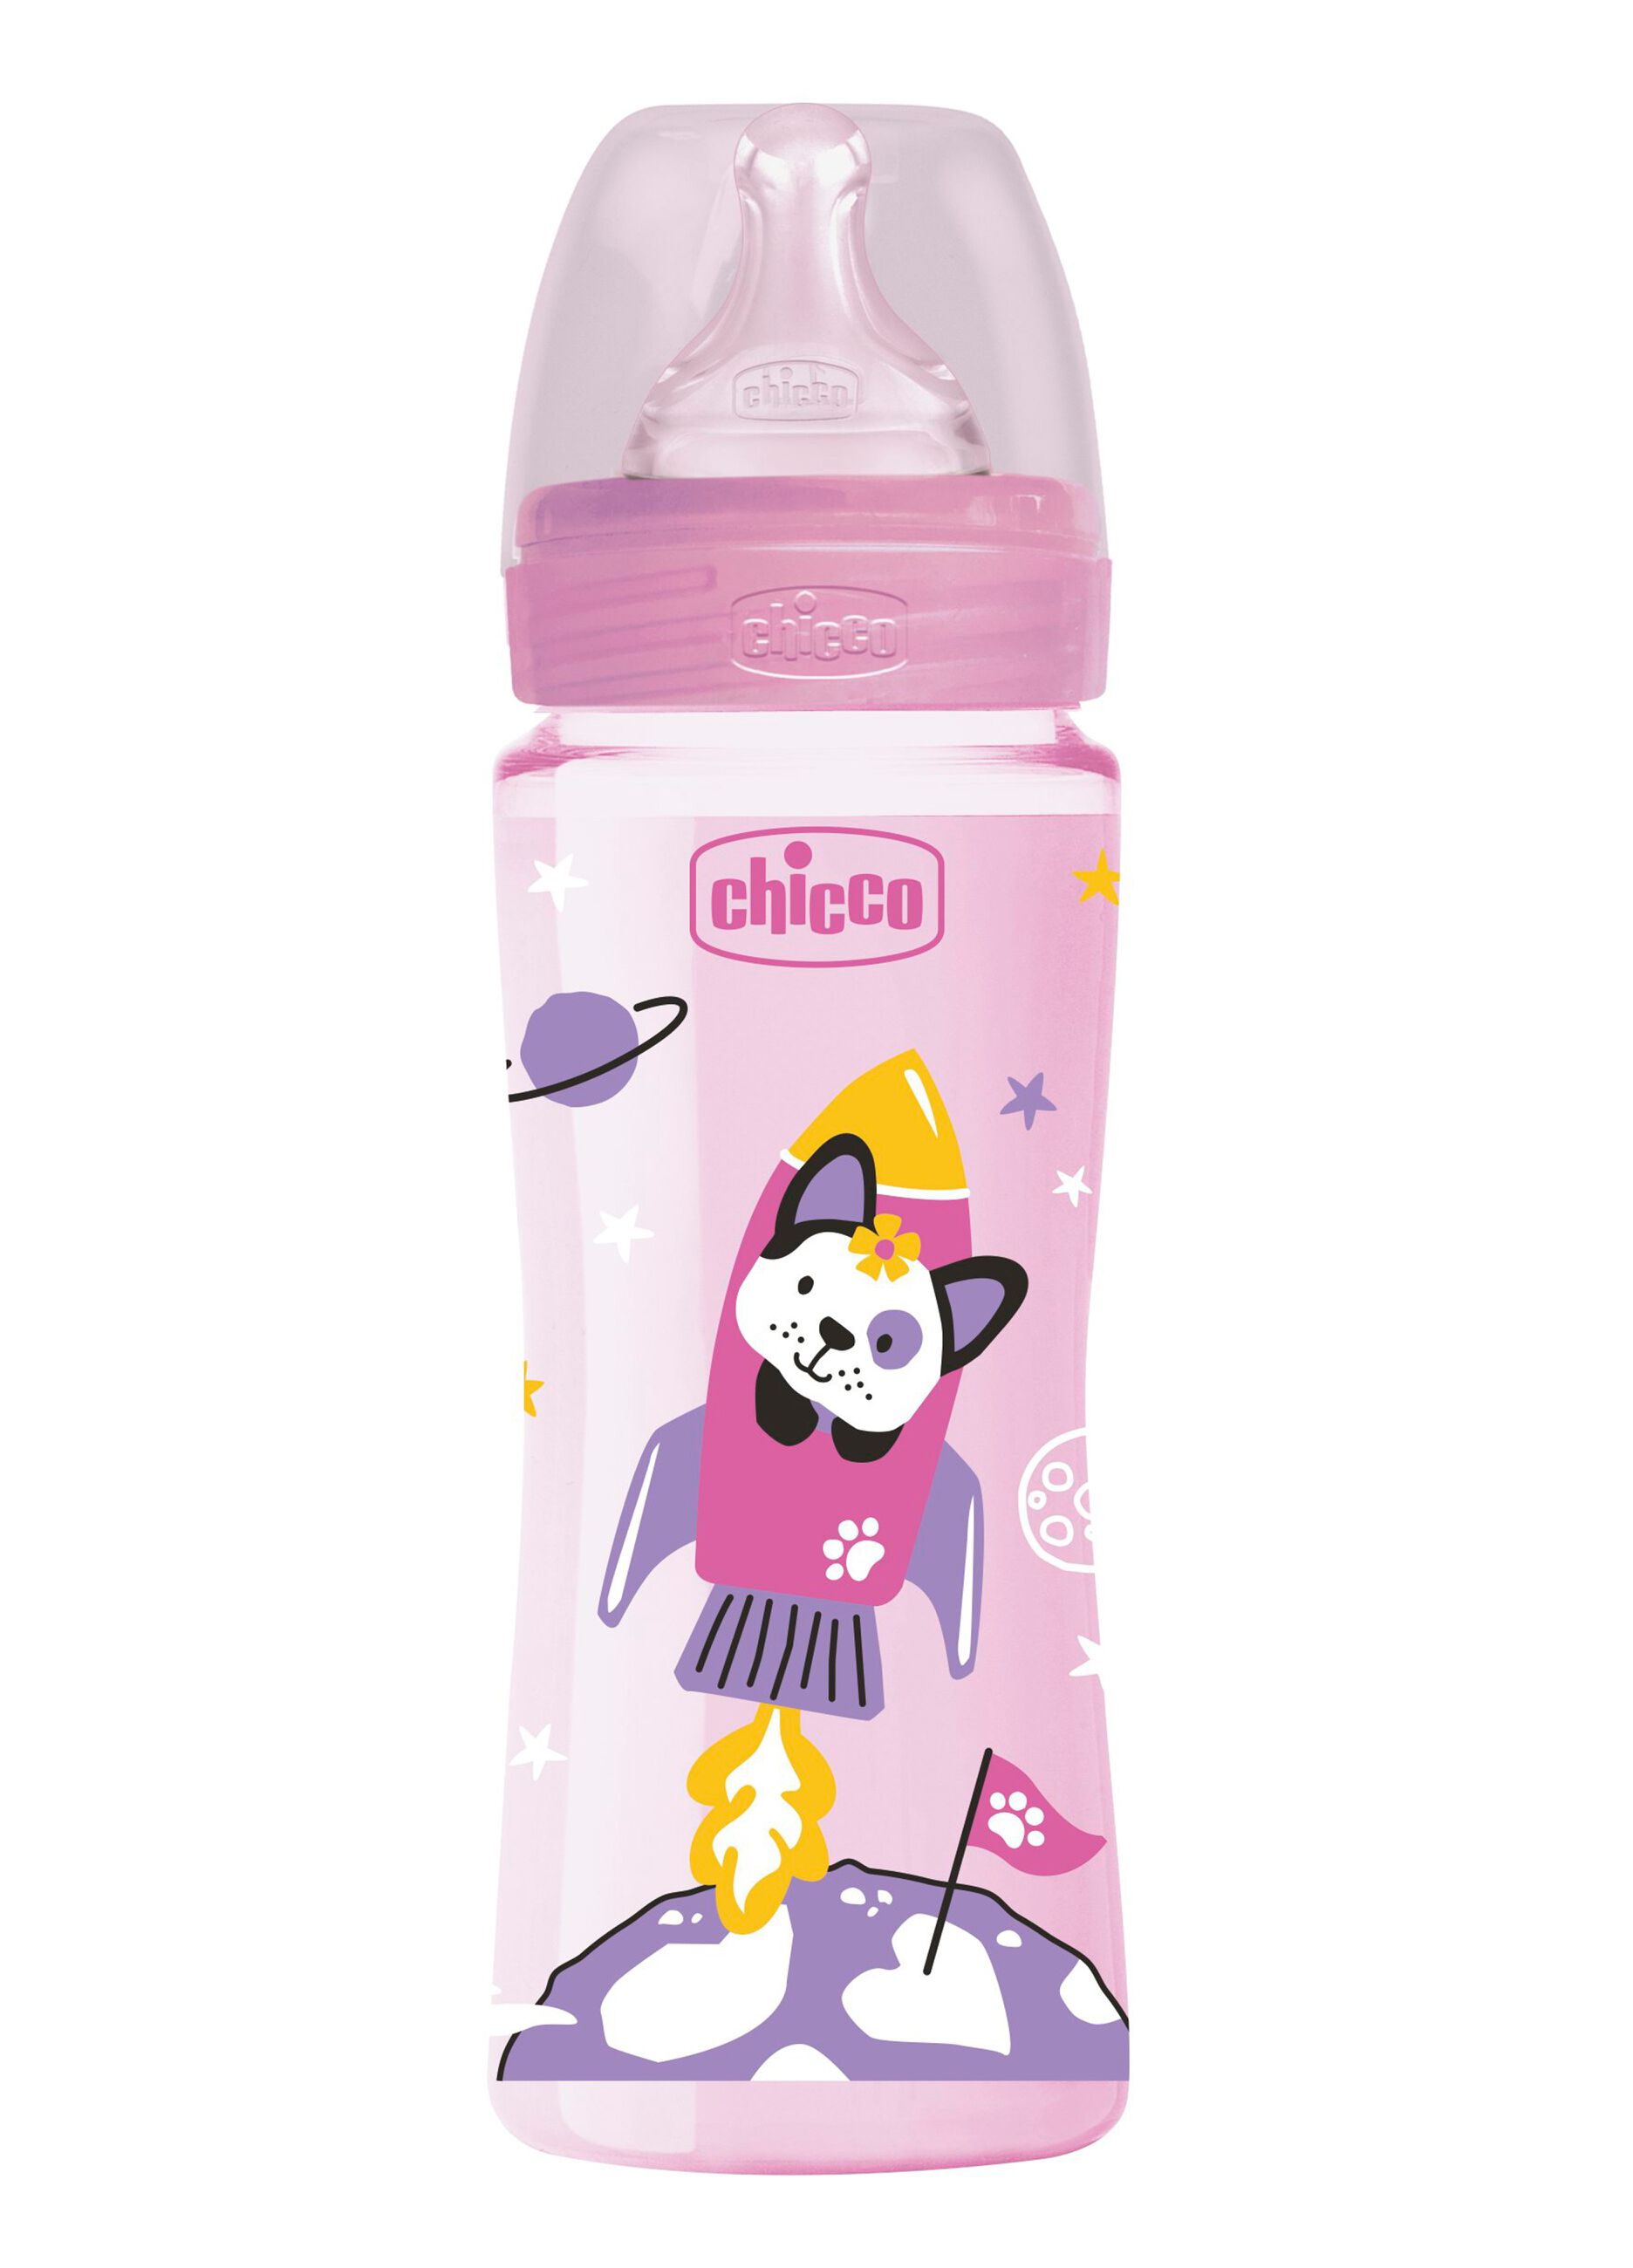 Chicco Benessere bottle 330ml